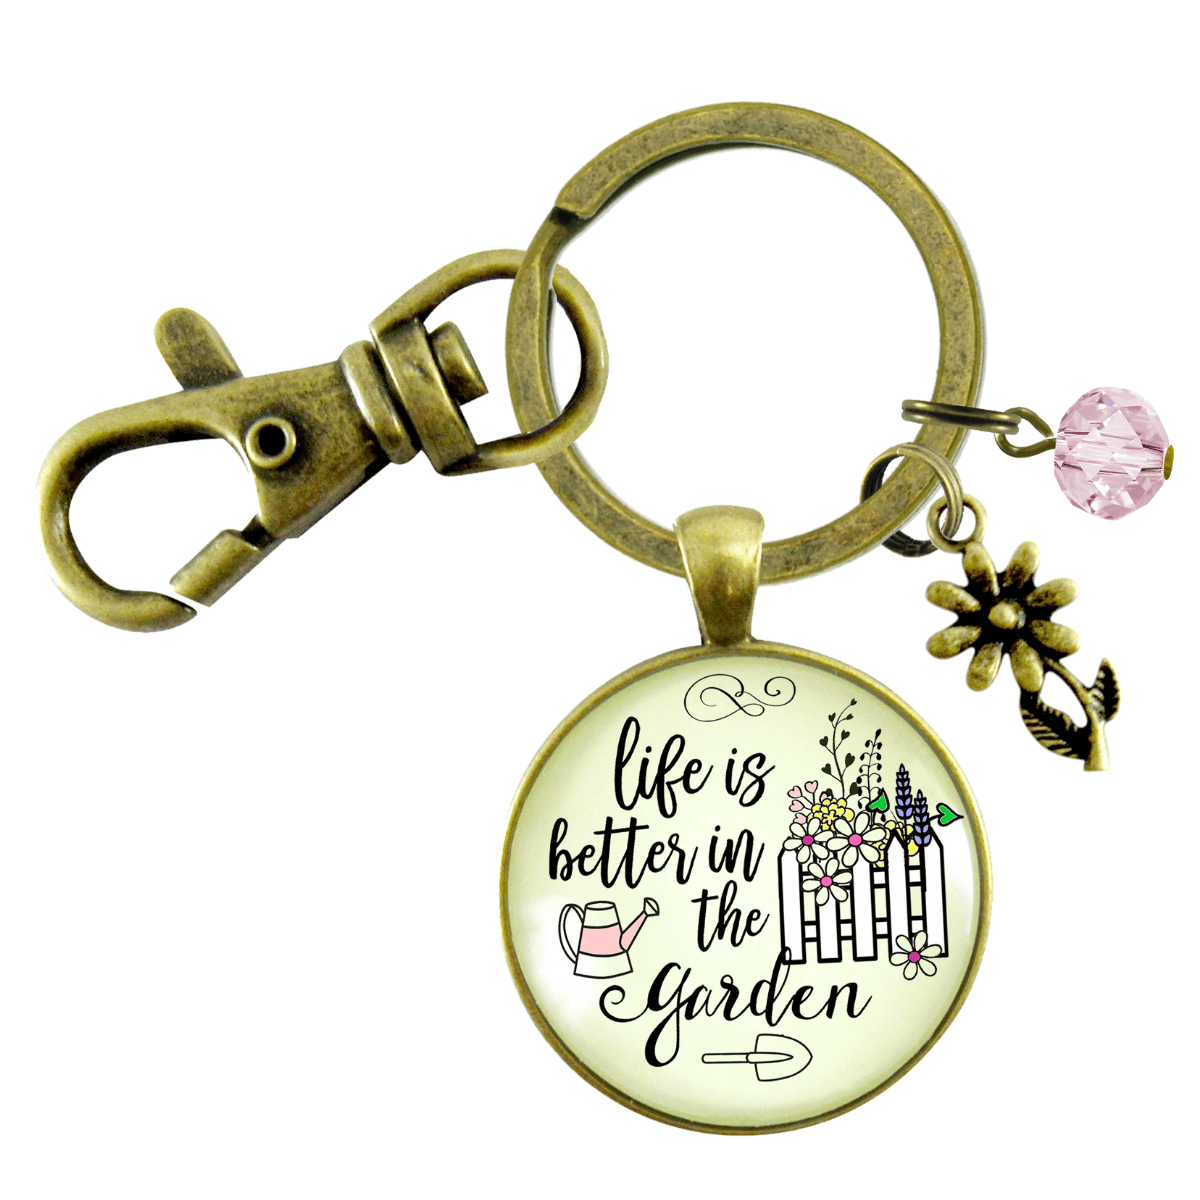 Manicurist Gift Keychain Life Isn't Perfect But Nails Can Be Beautician Jewelry Gift For Women - Gutsy Goodness